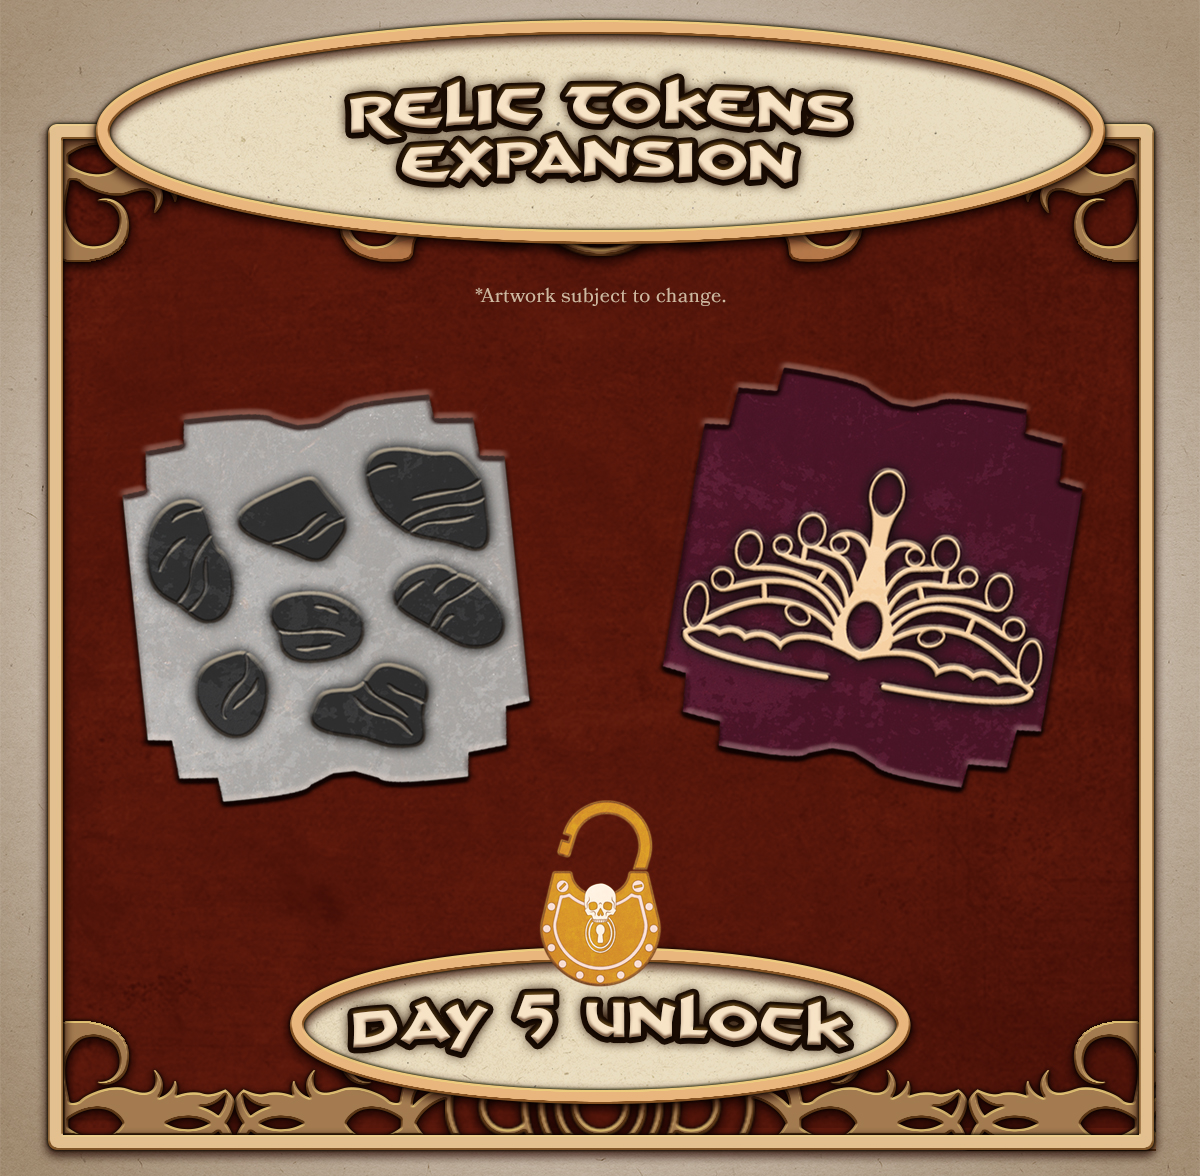 Relic Tokens are coming to The Adventures of Conan! ⚔️ Find out more: ow.ly/r84550RvUUa